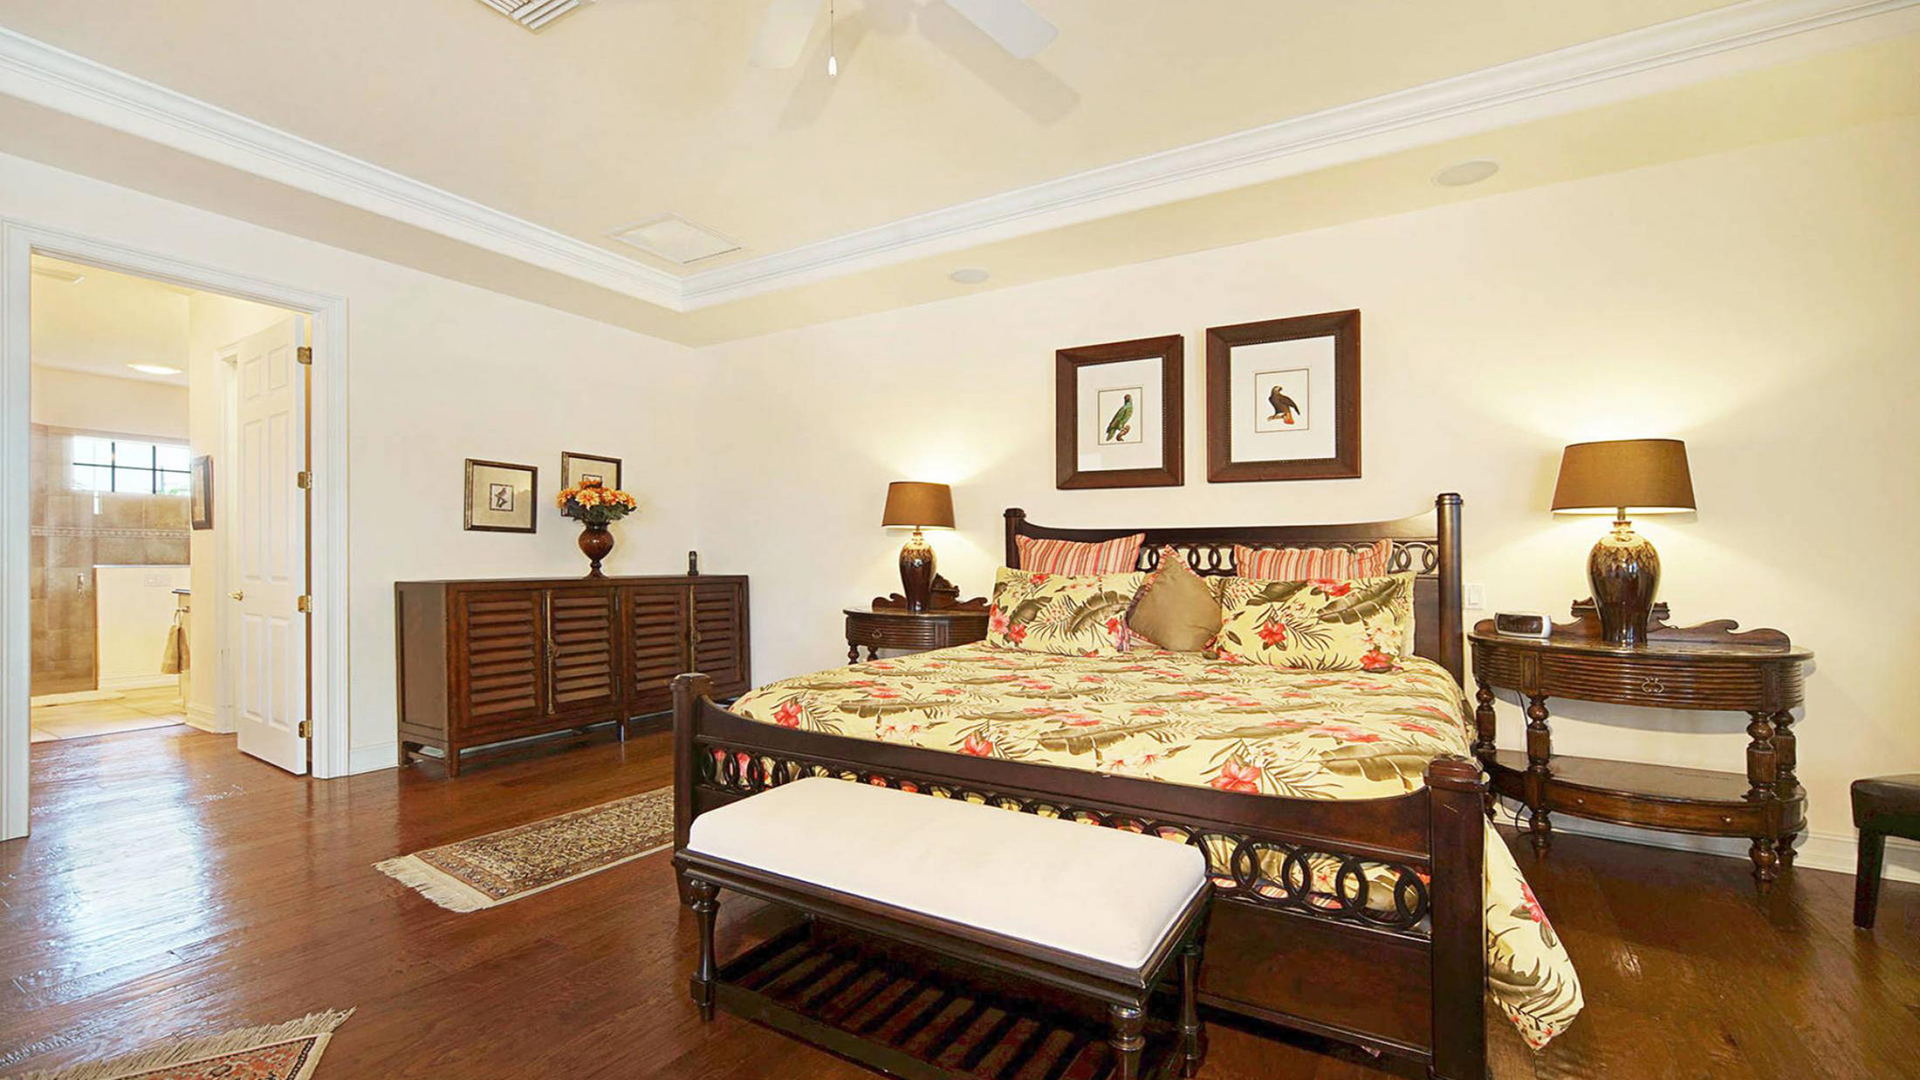 King size bed in the master bedroom